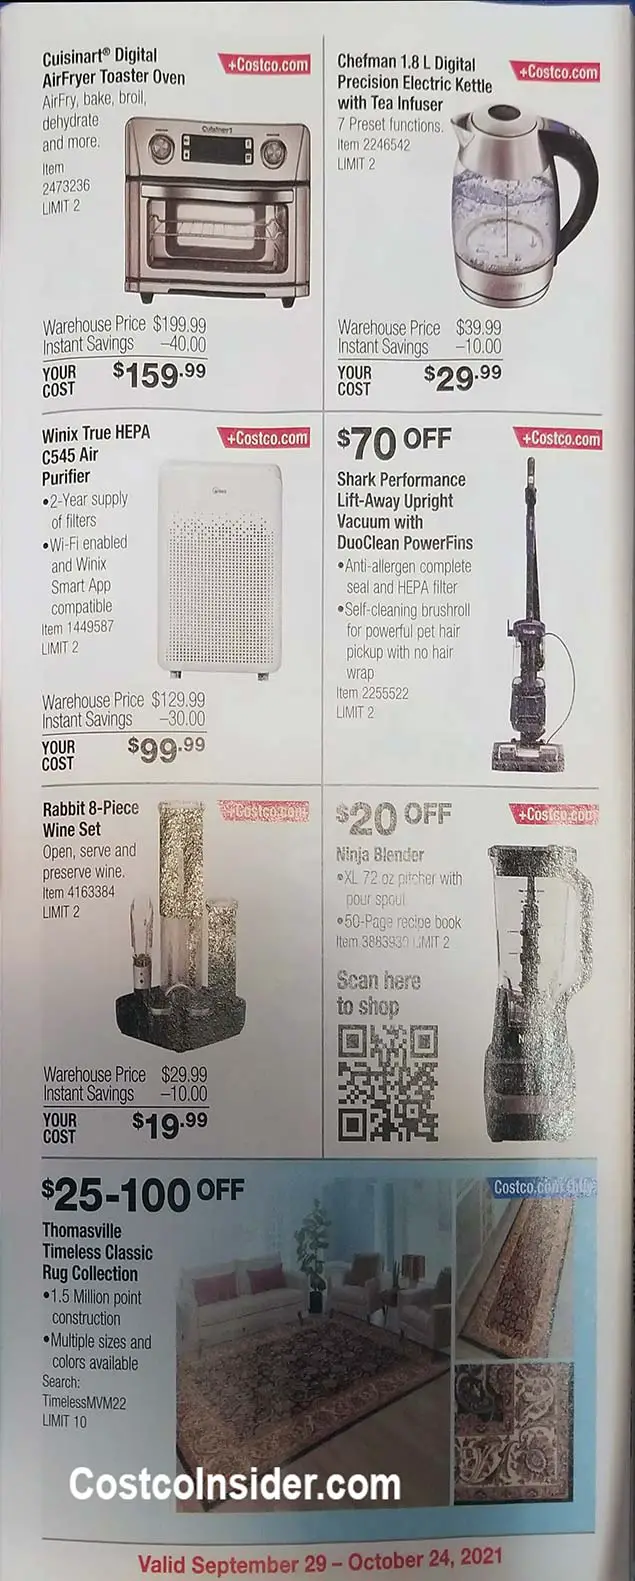 Costco October 2021 Coupon Book Page 2 Costco Insider